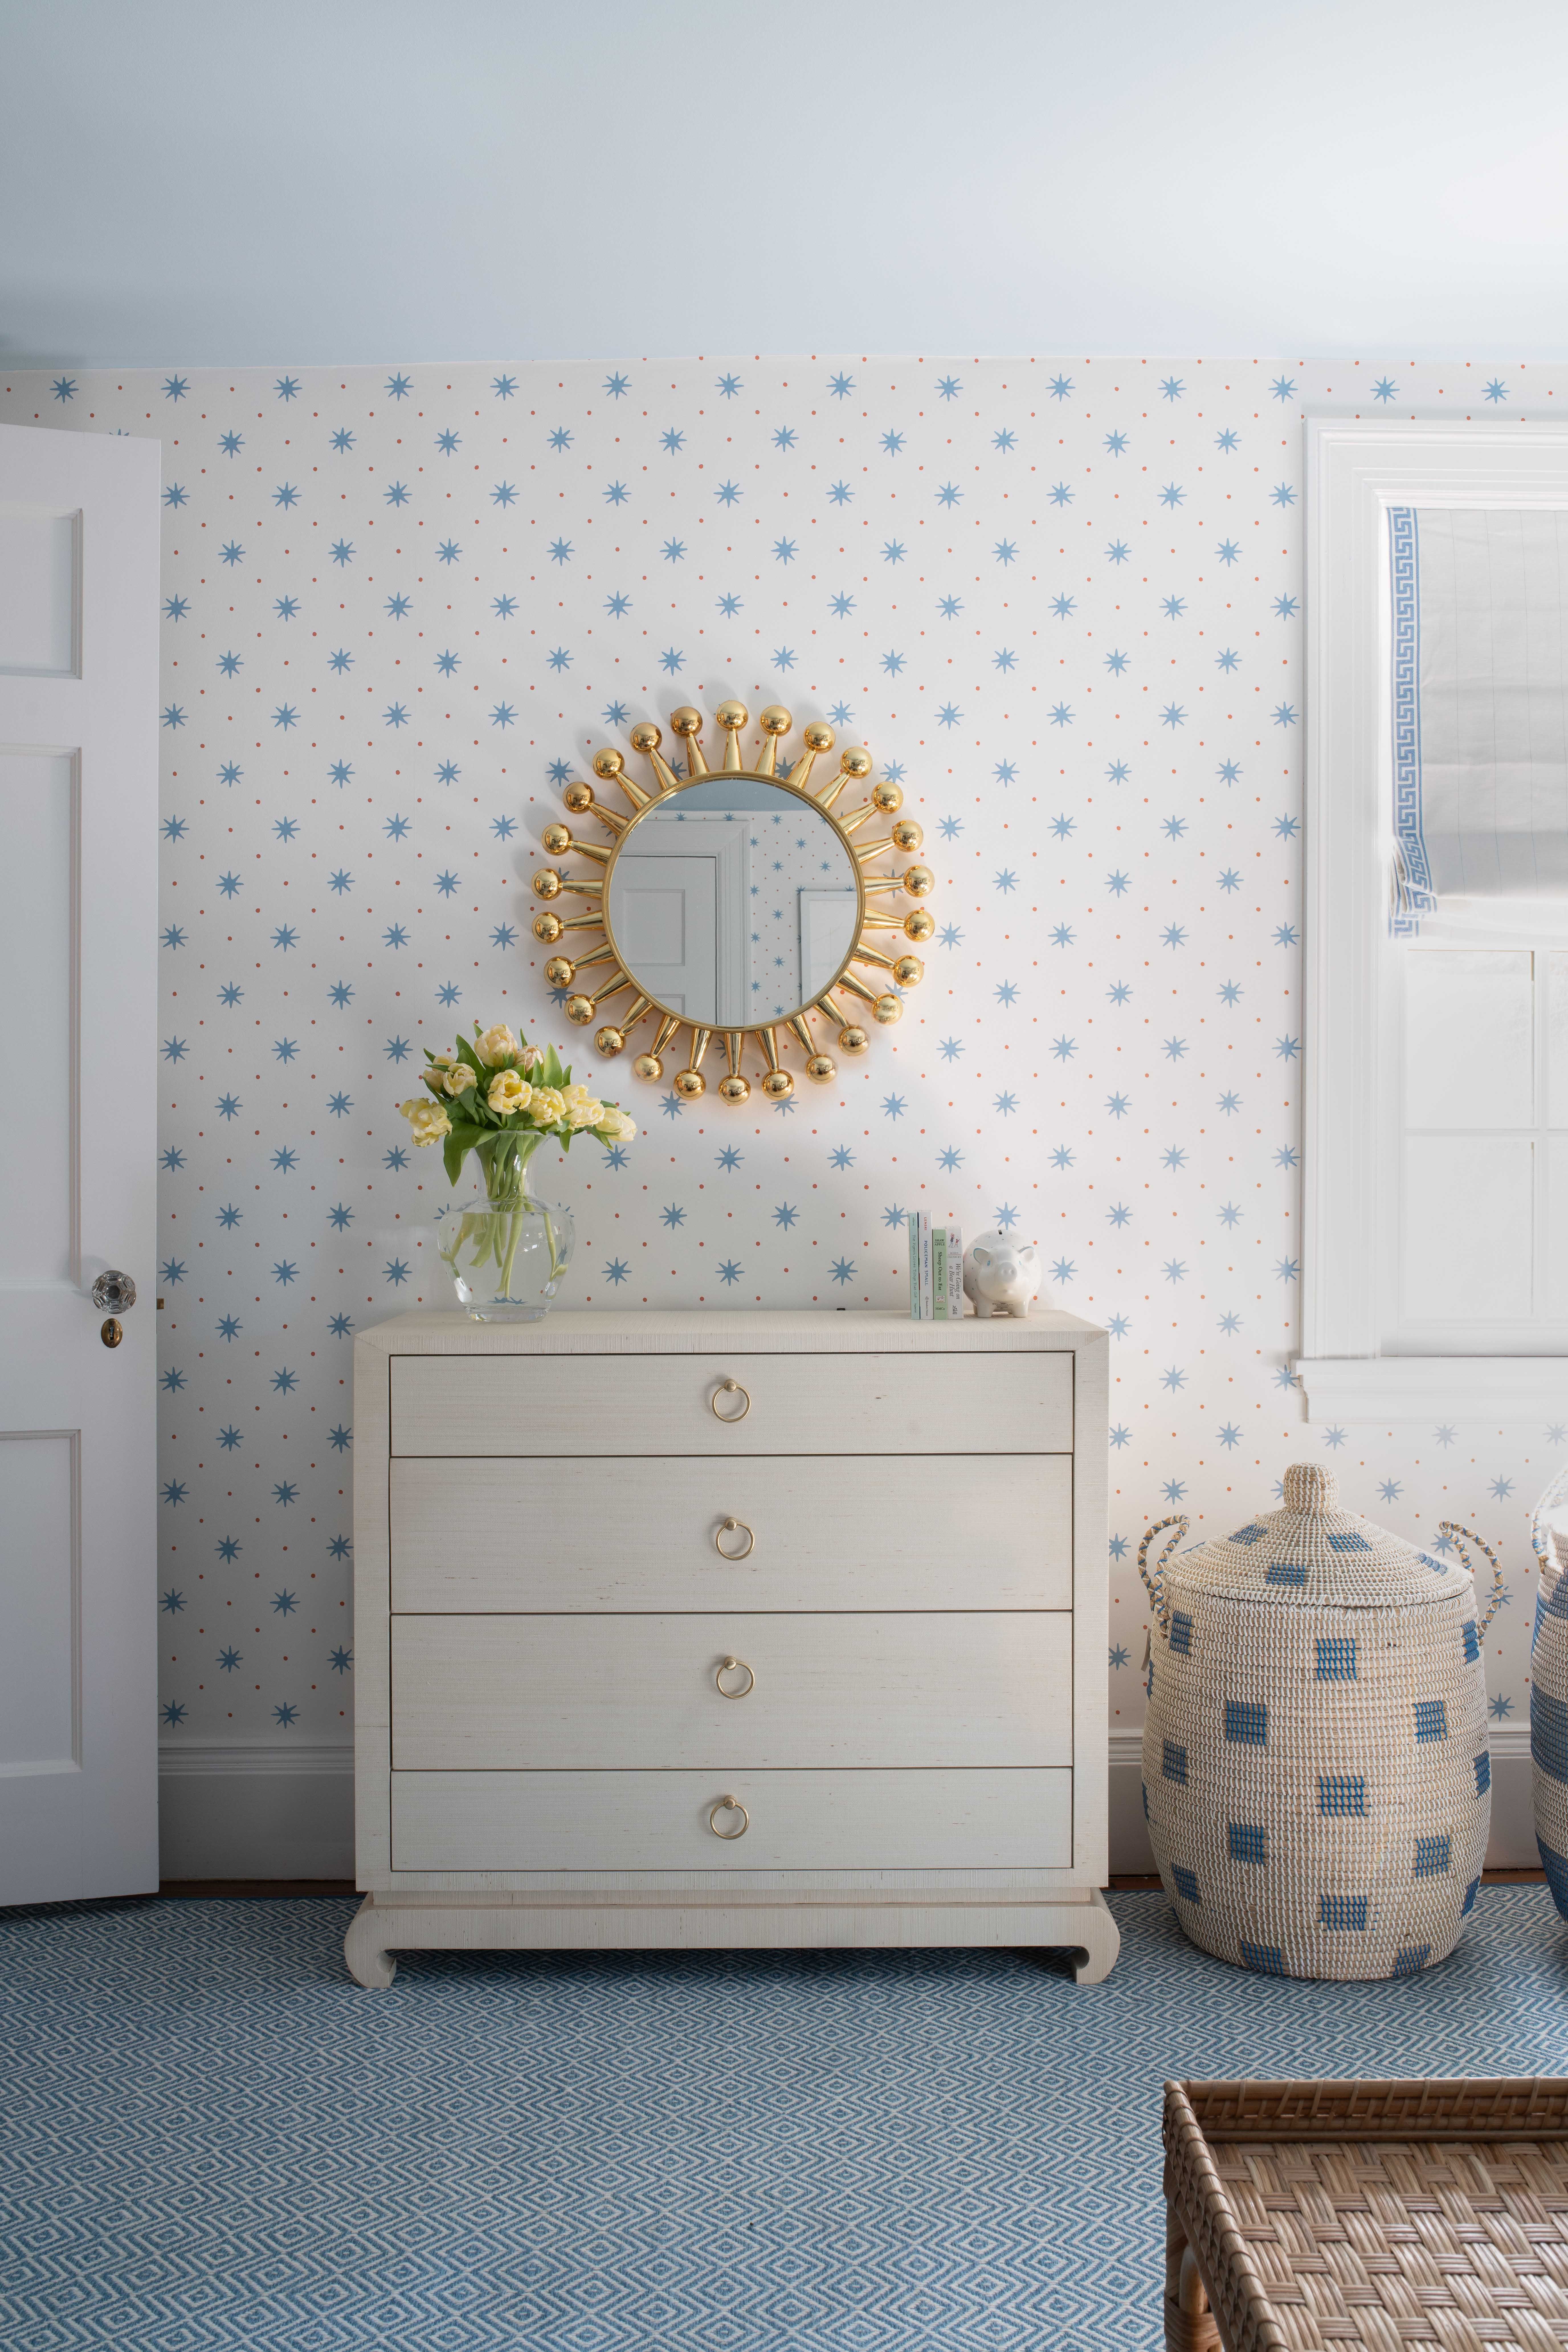 Sarah Trumbore's Nursery Design for Her Son Was Inspired by a Sister Parish  Wallpaper